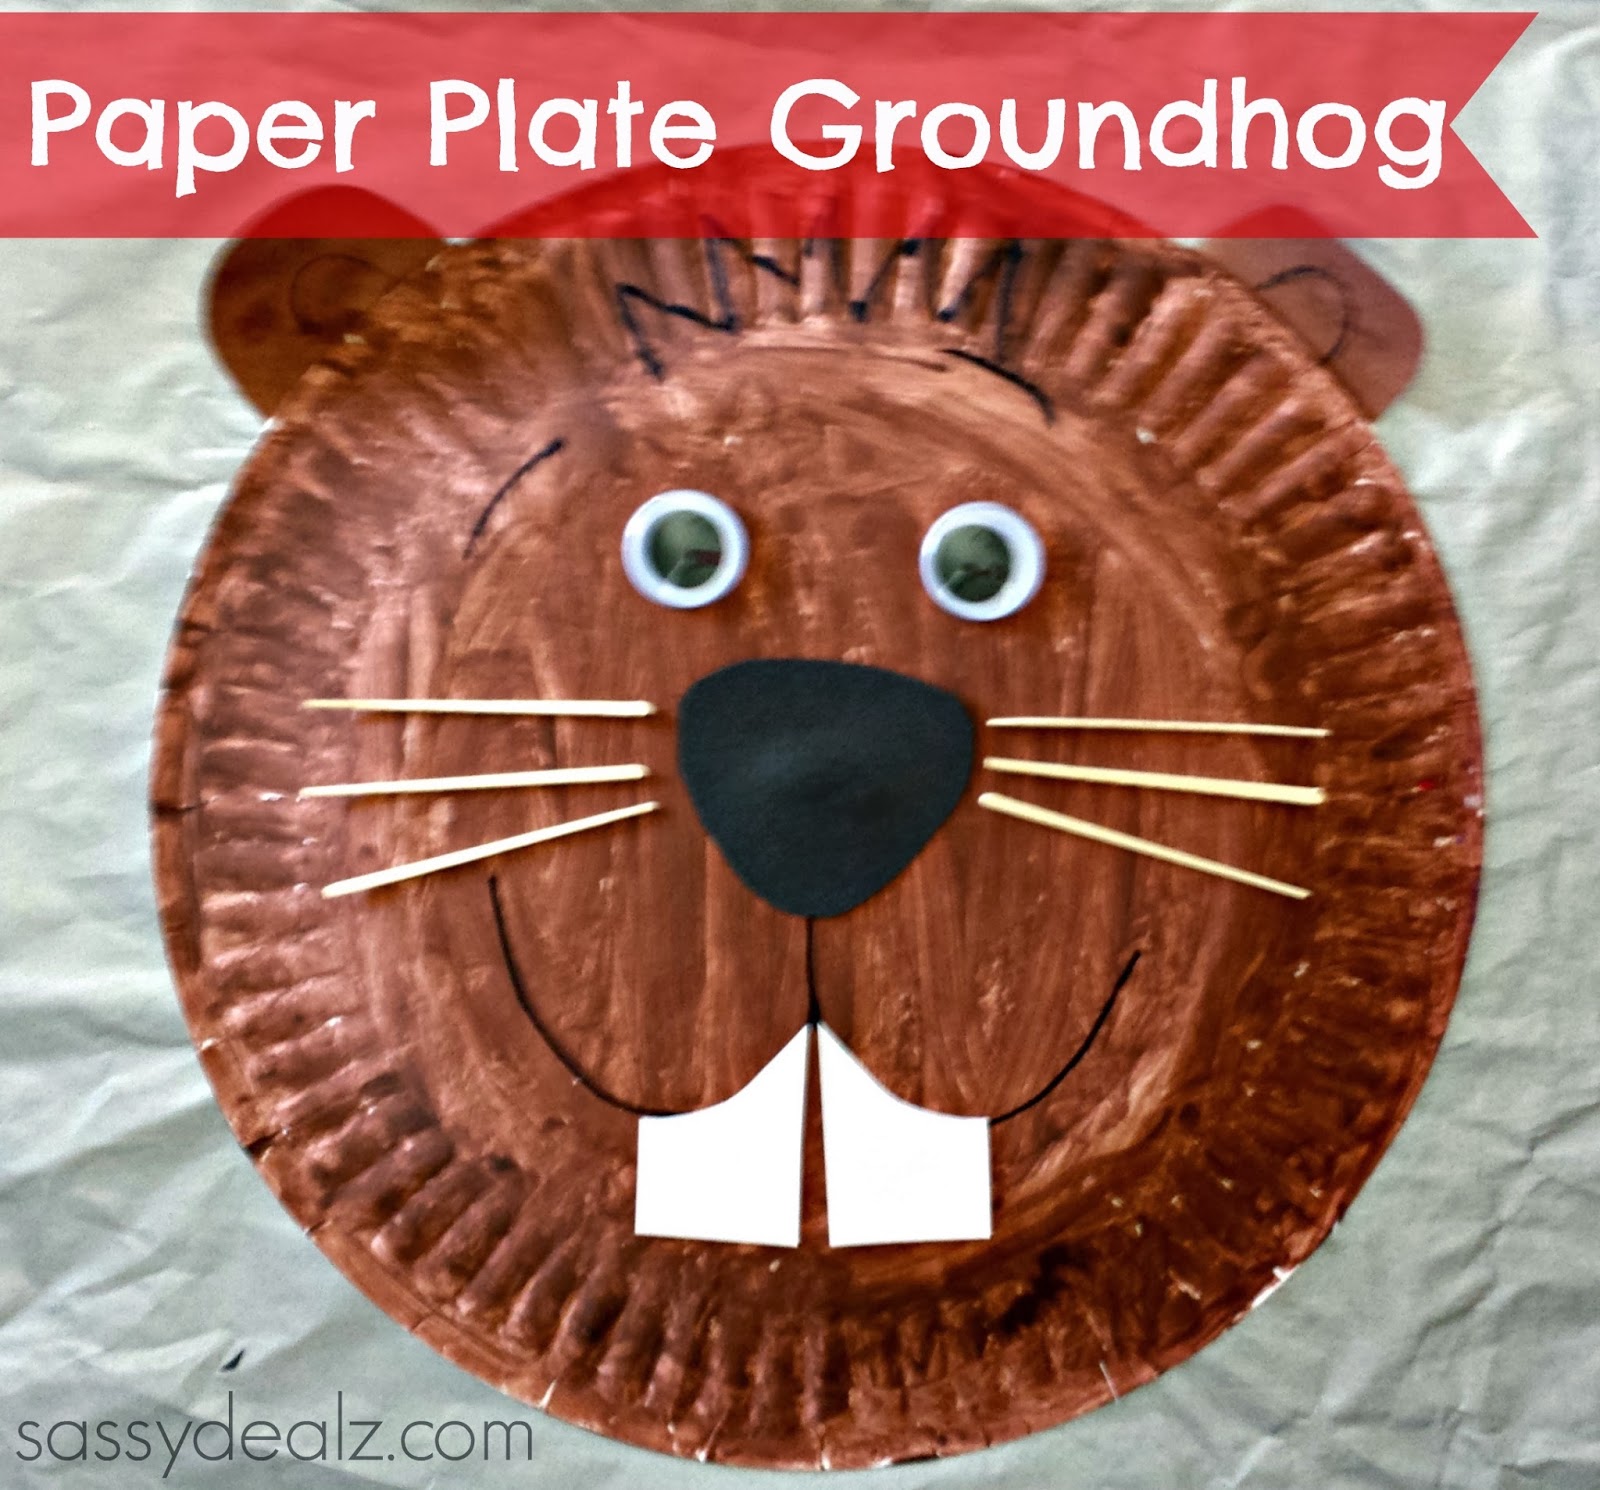 Groundhog Paper Plate Craft For Kids Crafty Morning